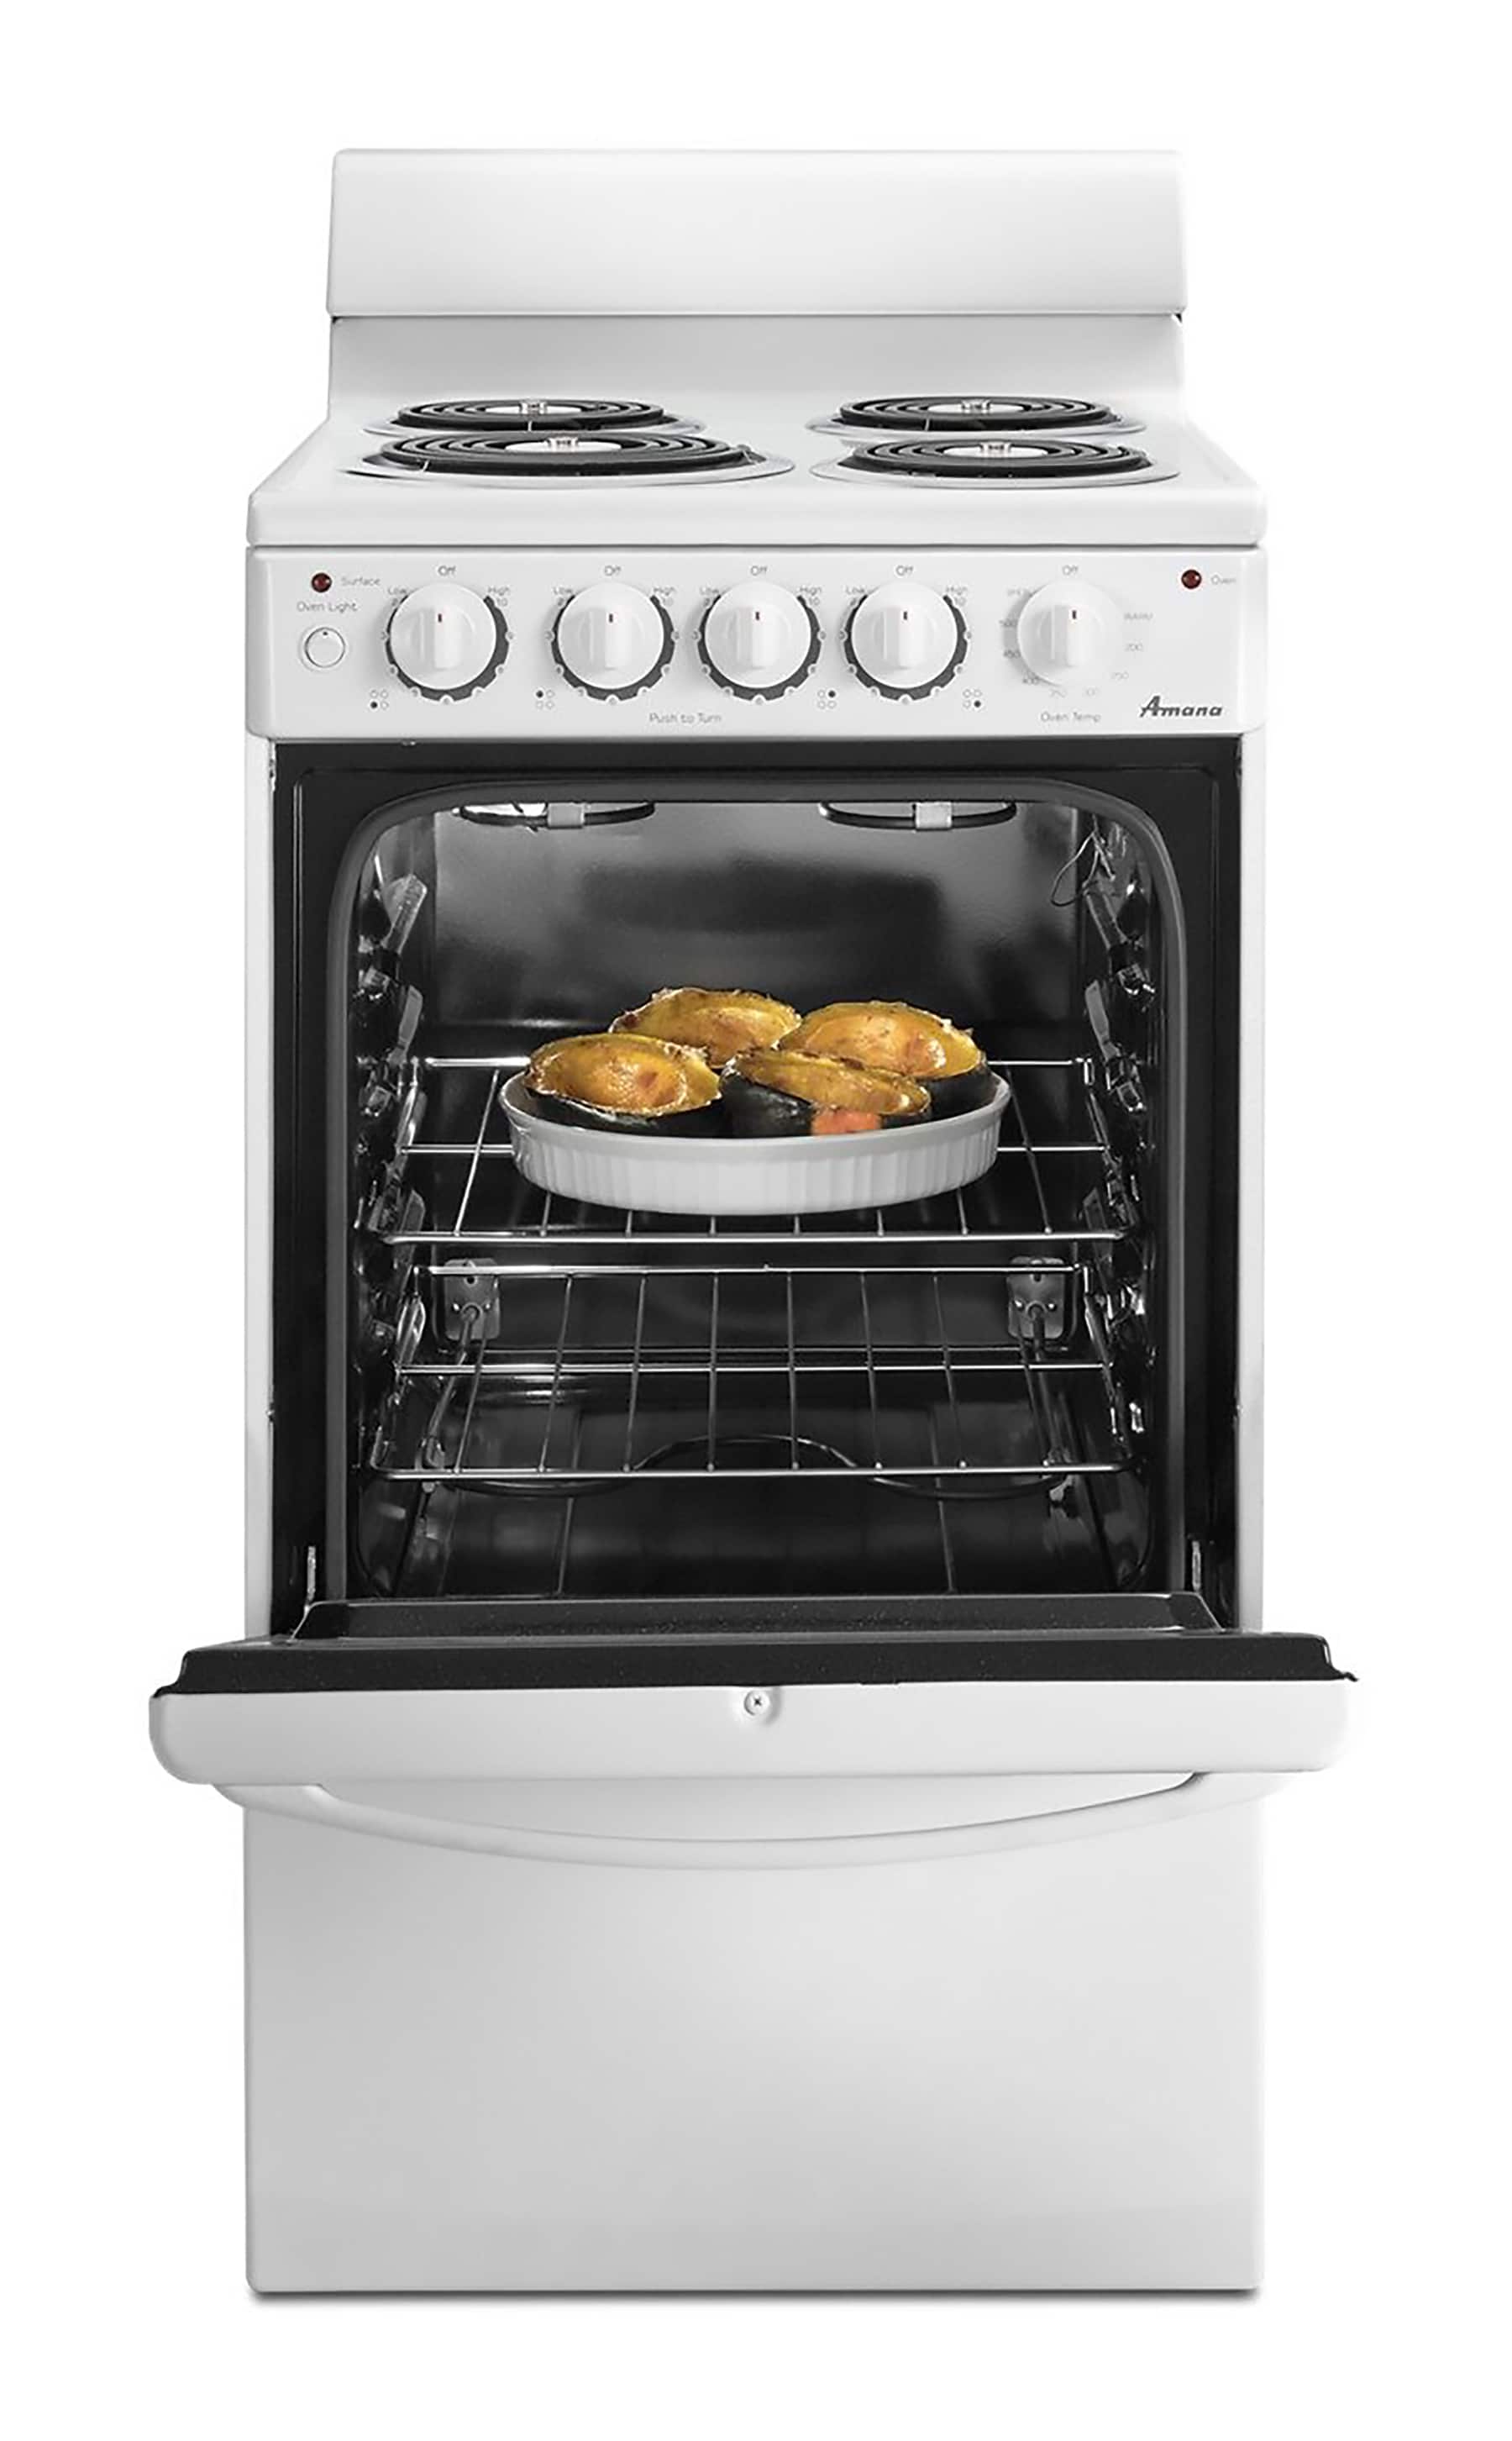 Holiday 20-in 4 Burners 2.4-cu ft Freestanding Electric Range (White)